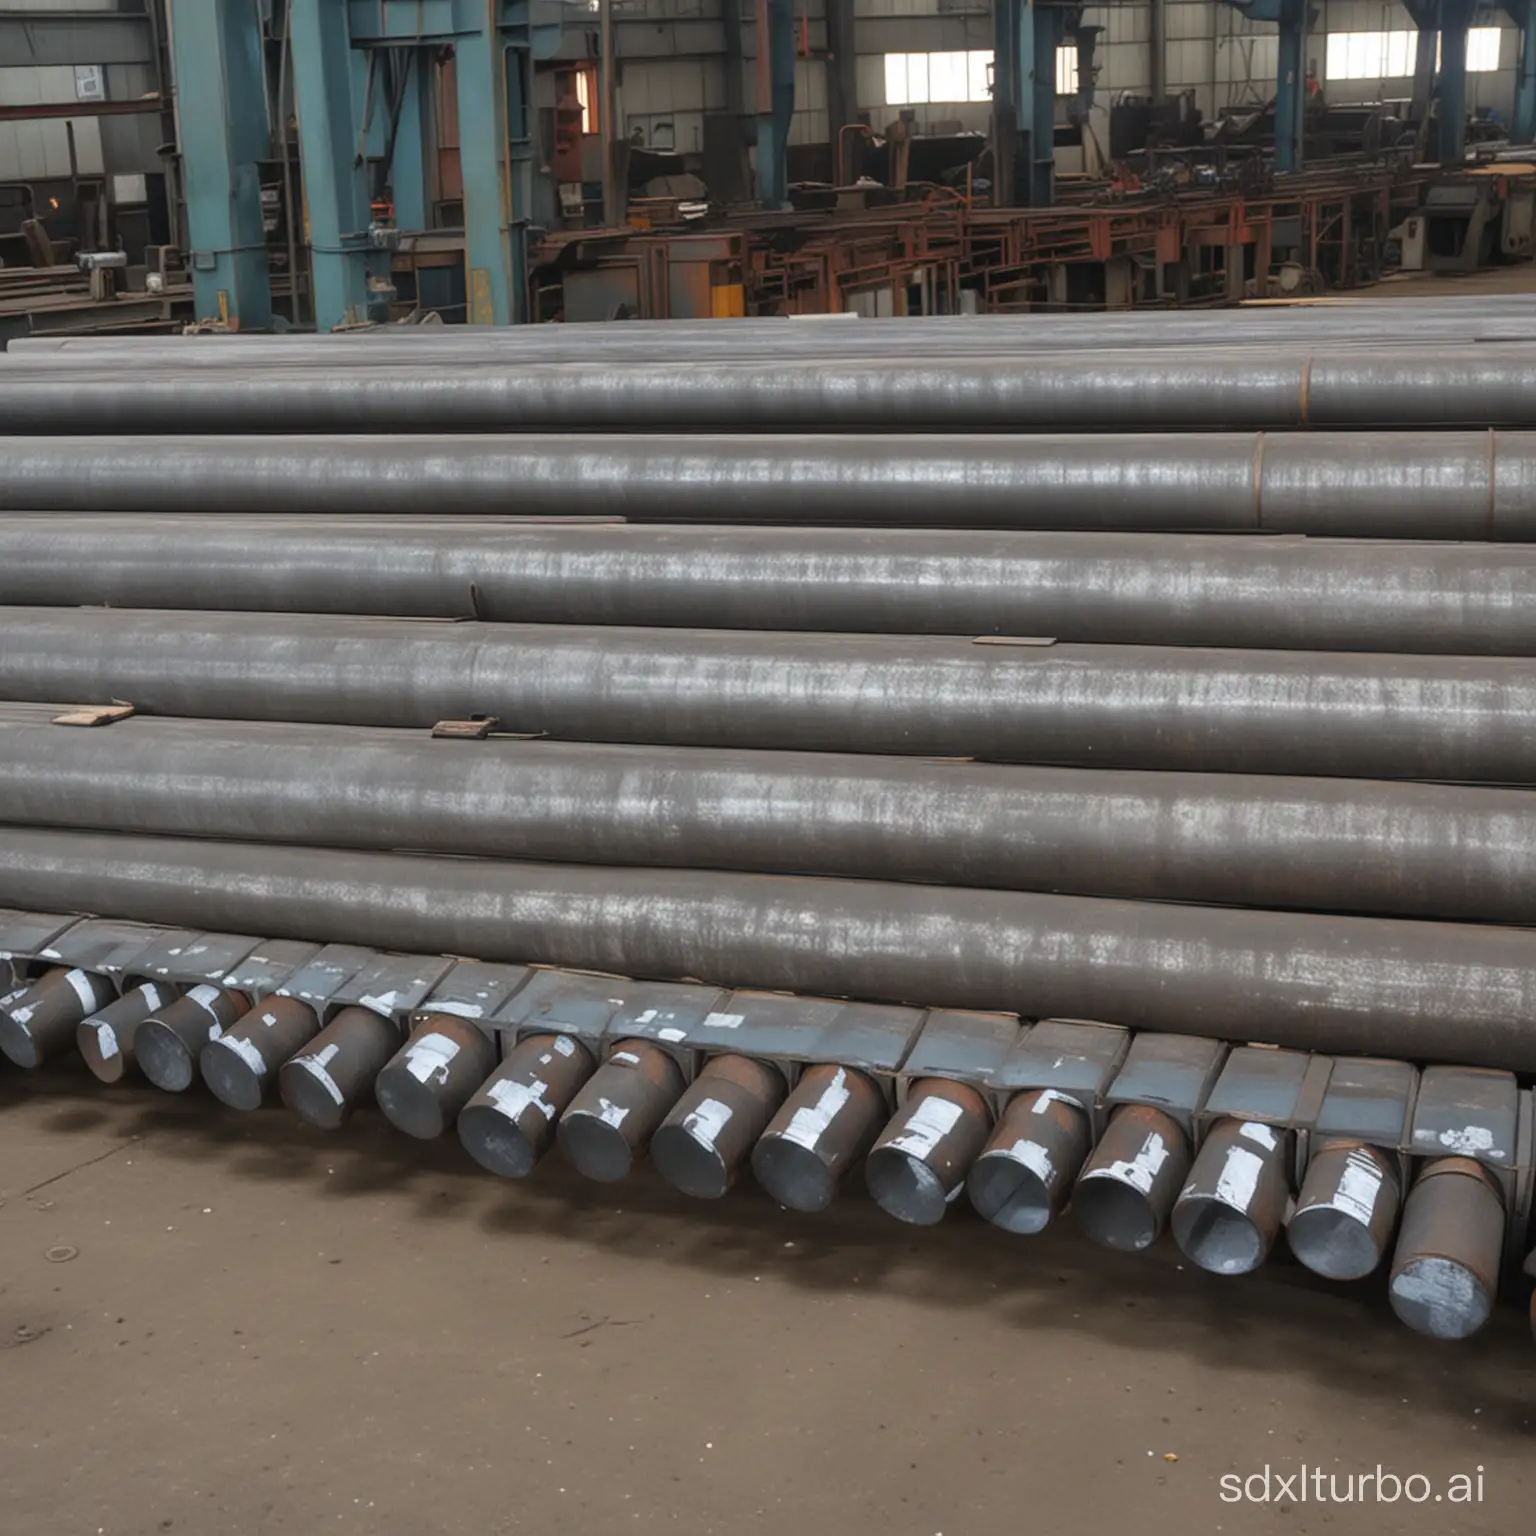 Steel-Round-Bar-Manufacturing-Plant-Industrial-Production-Process